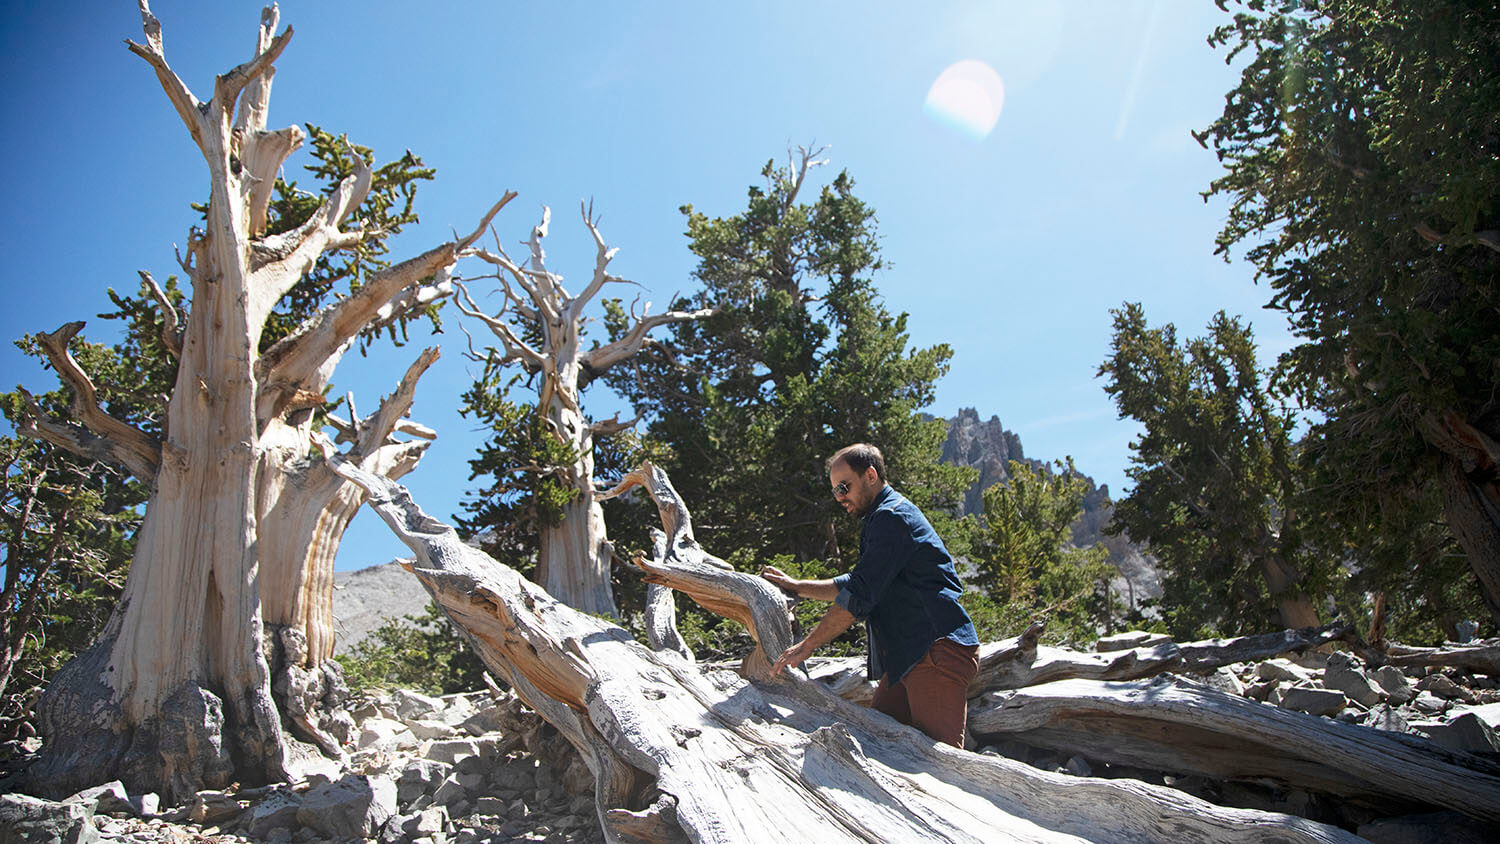 DON’T GET IT TWISTED: The Bristlecone Pine is the Gnarliest Tree on Earth